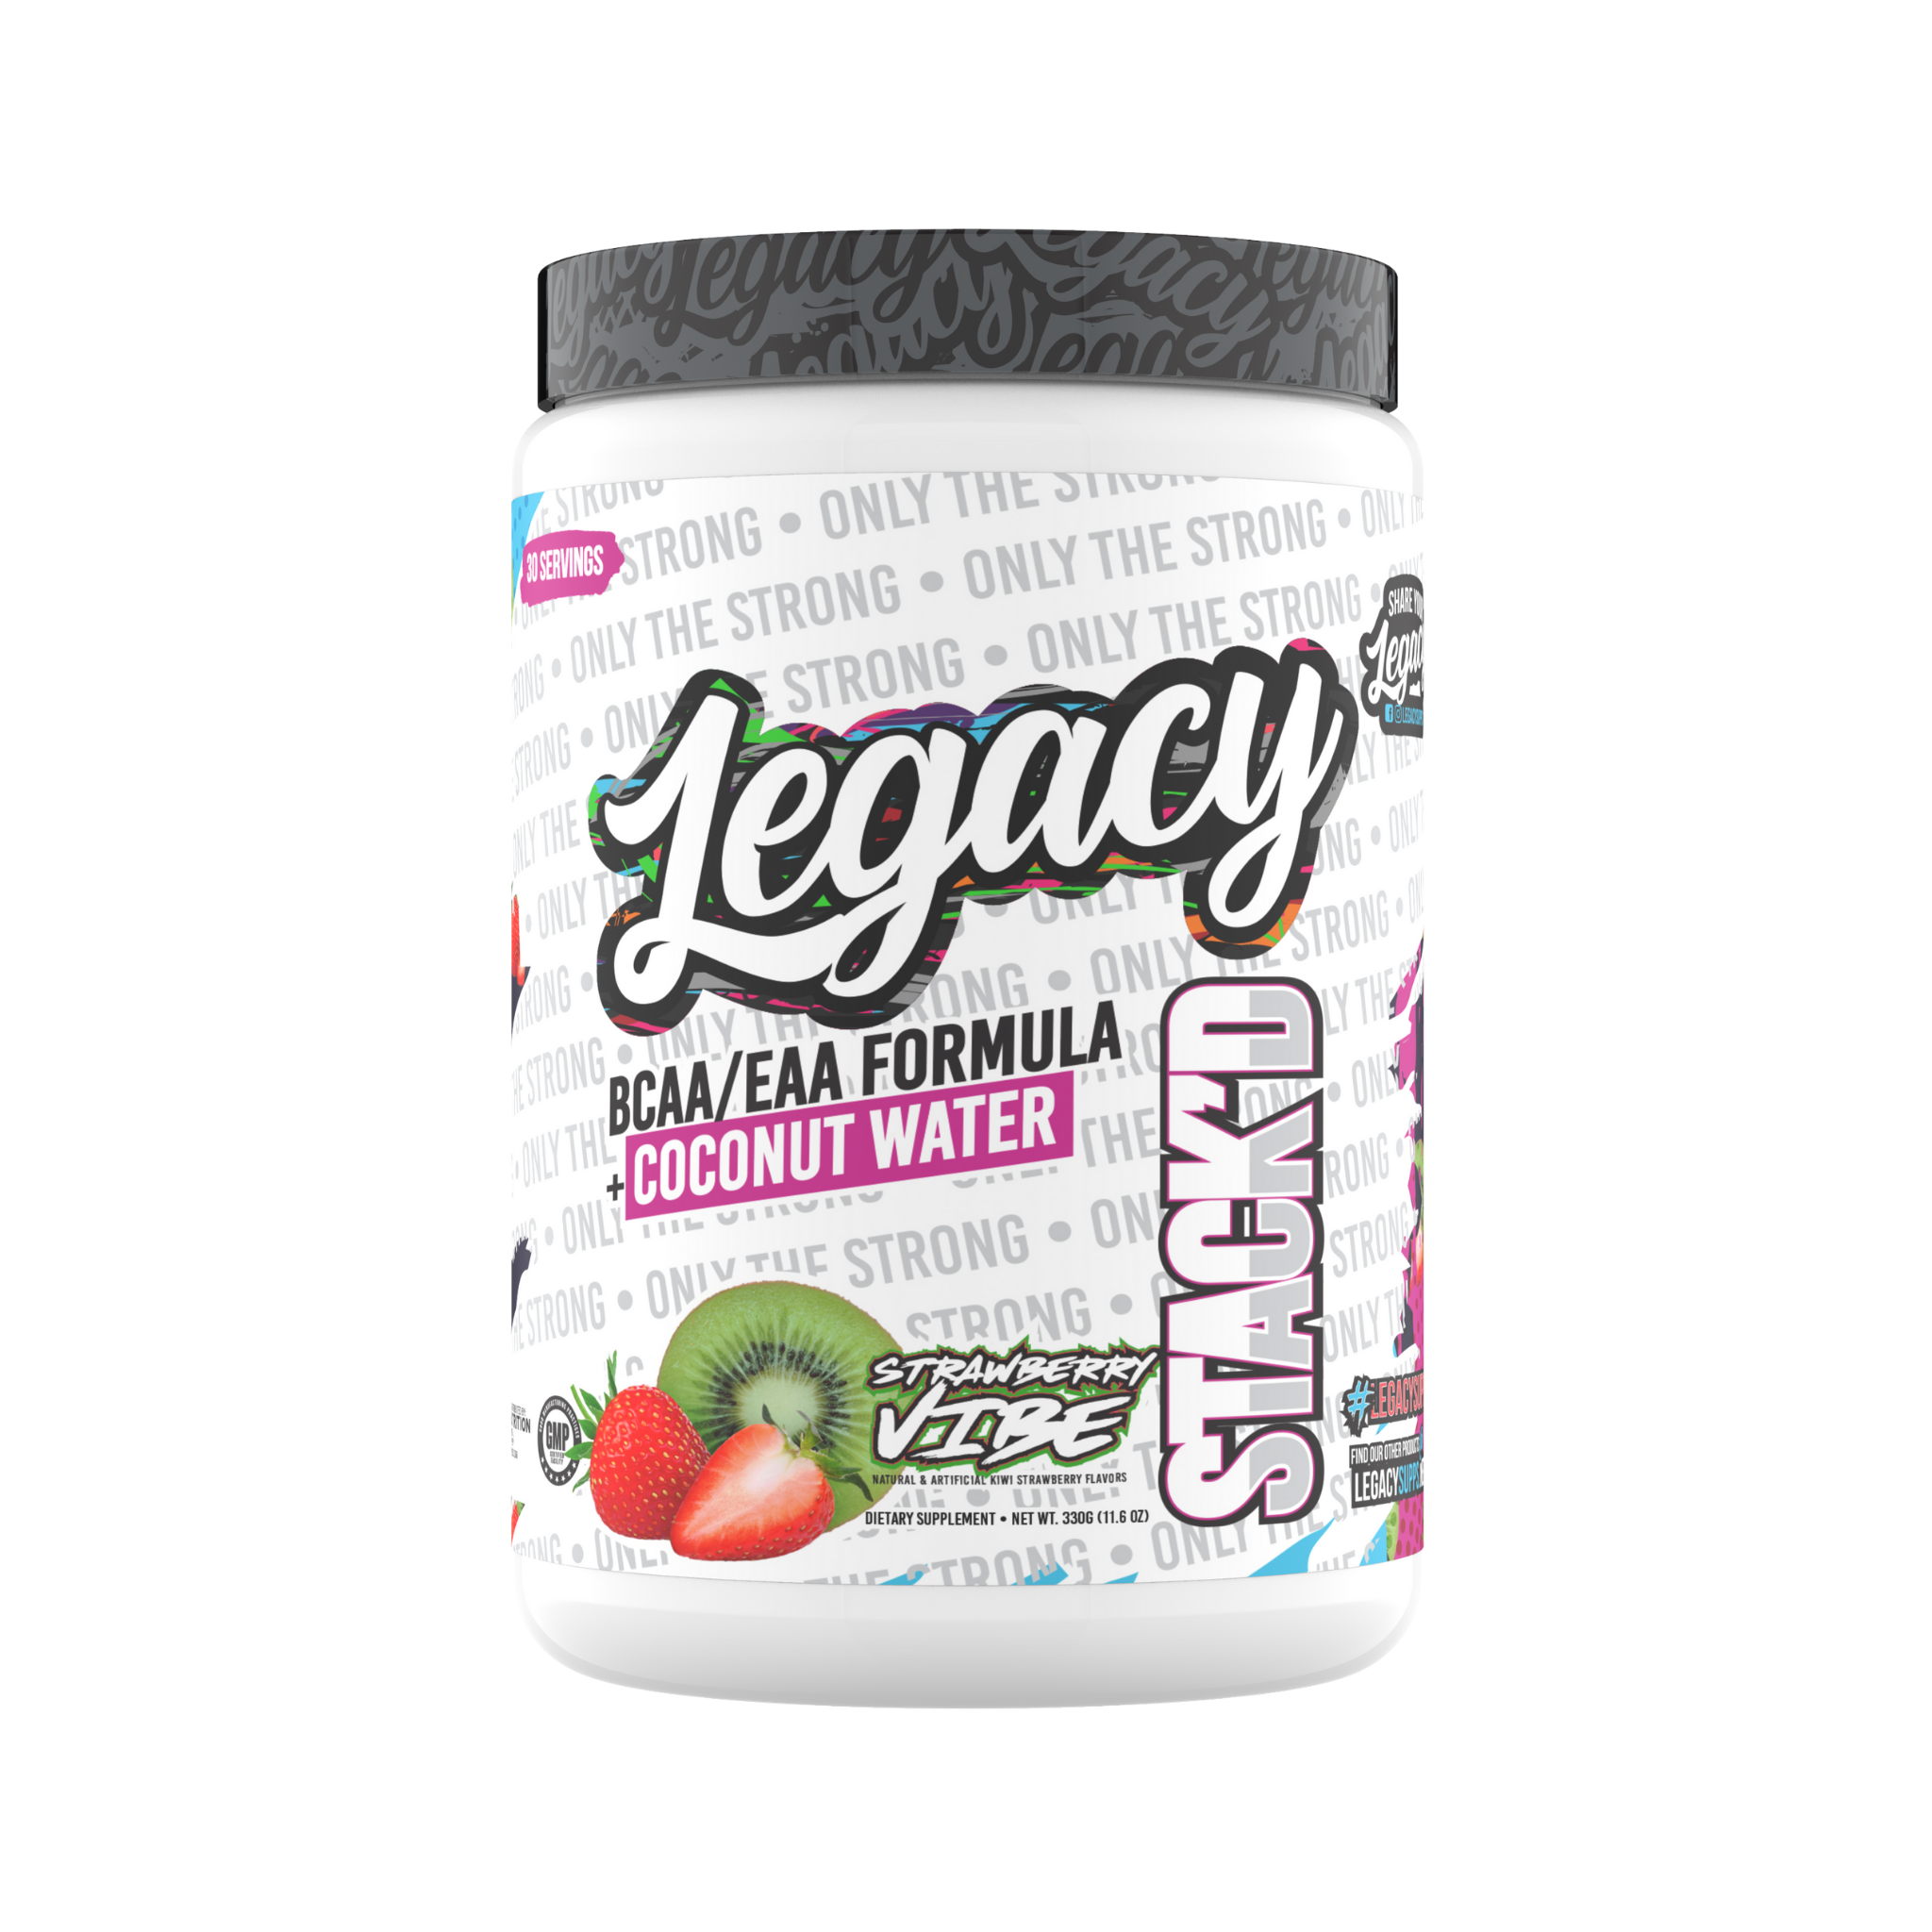 Legacy Stackd EAAs/BCAAs + Coconut Water Hydration Formula, Strawberry Vibe